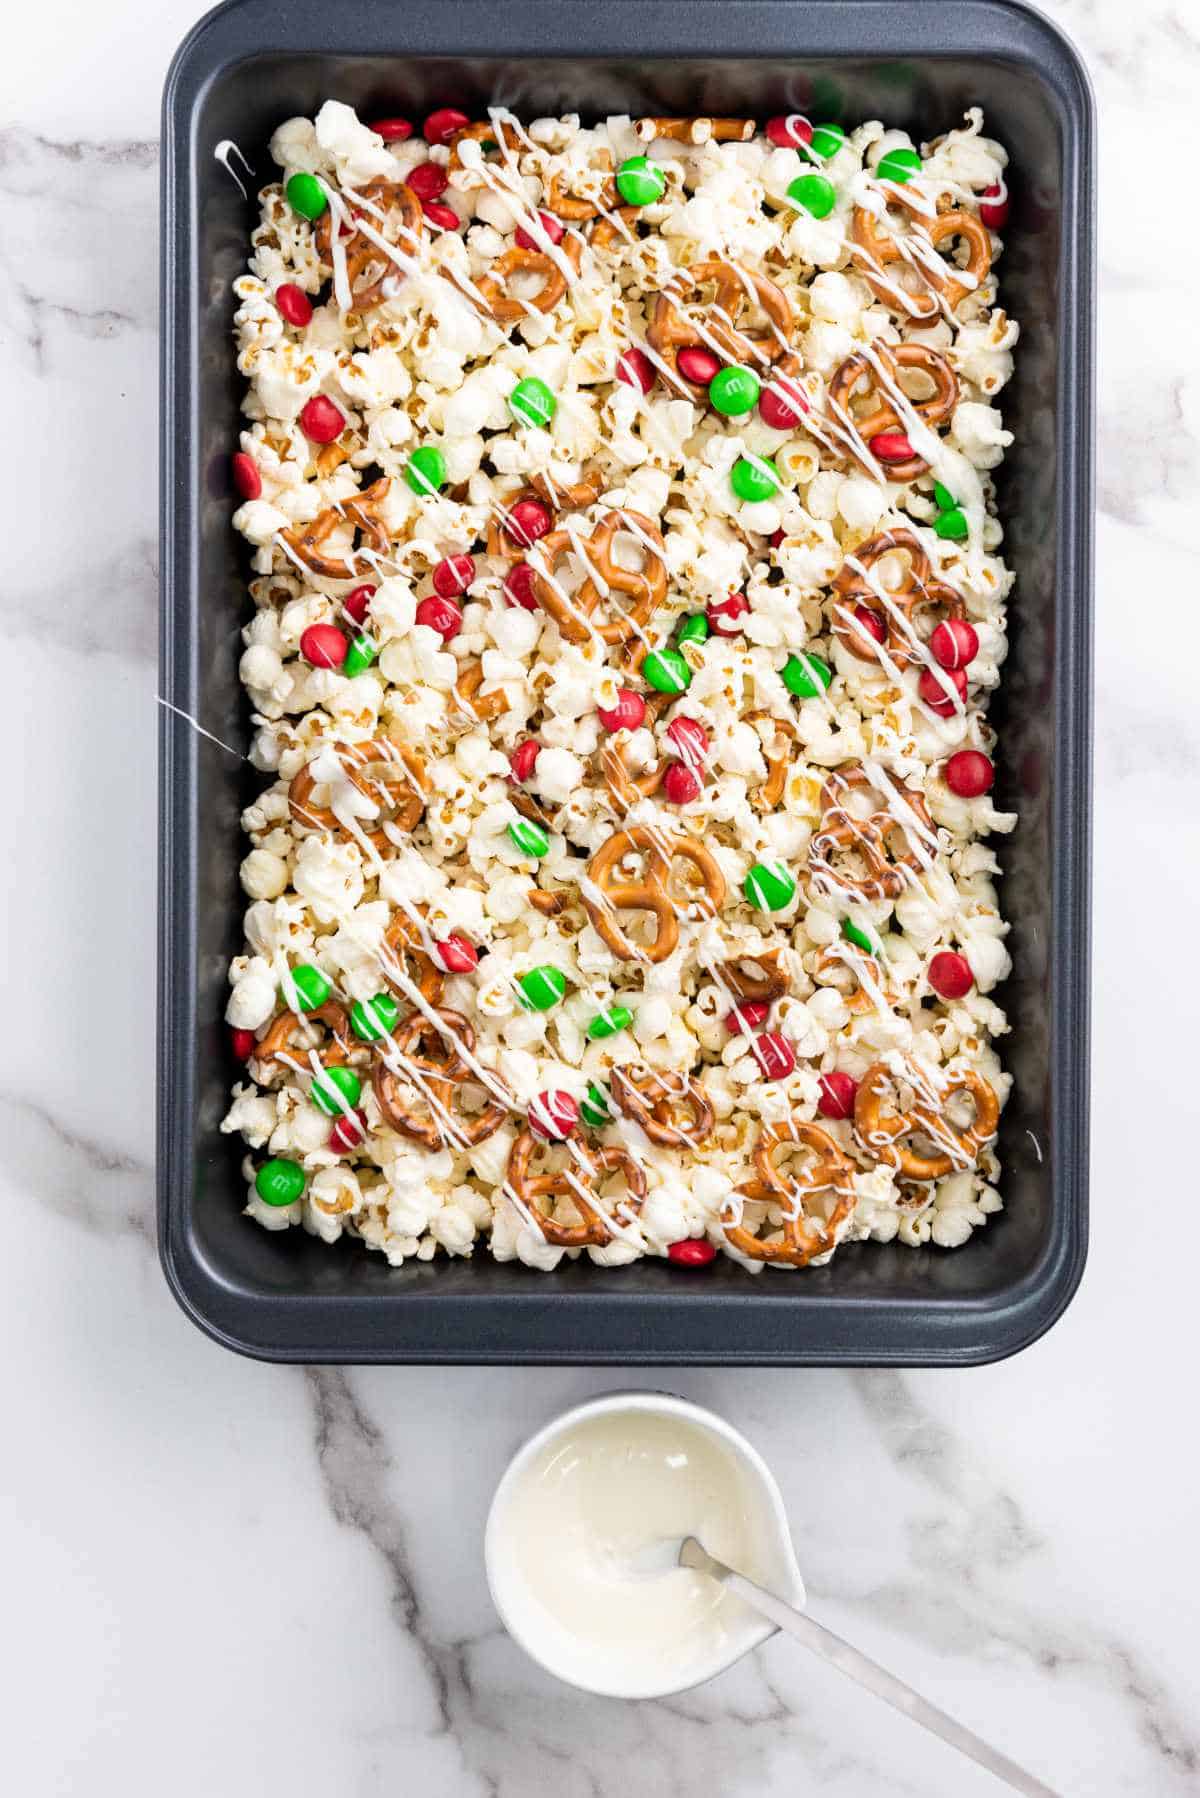 white chocolate drizzled over popcorn, pretzels, and holiday m&m's.